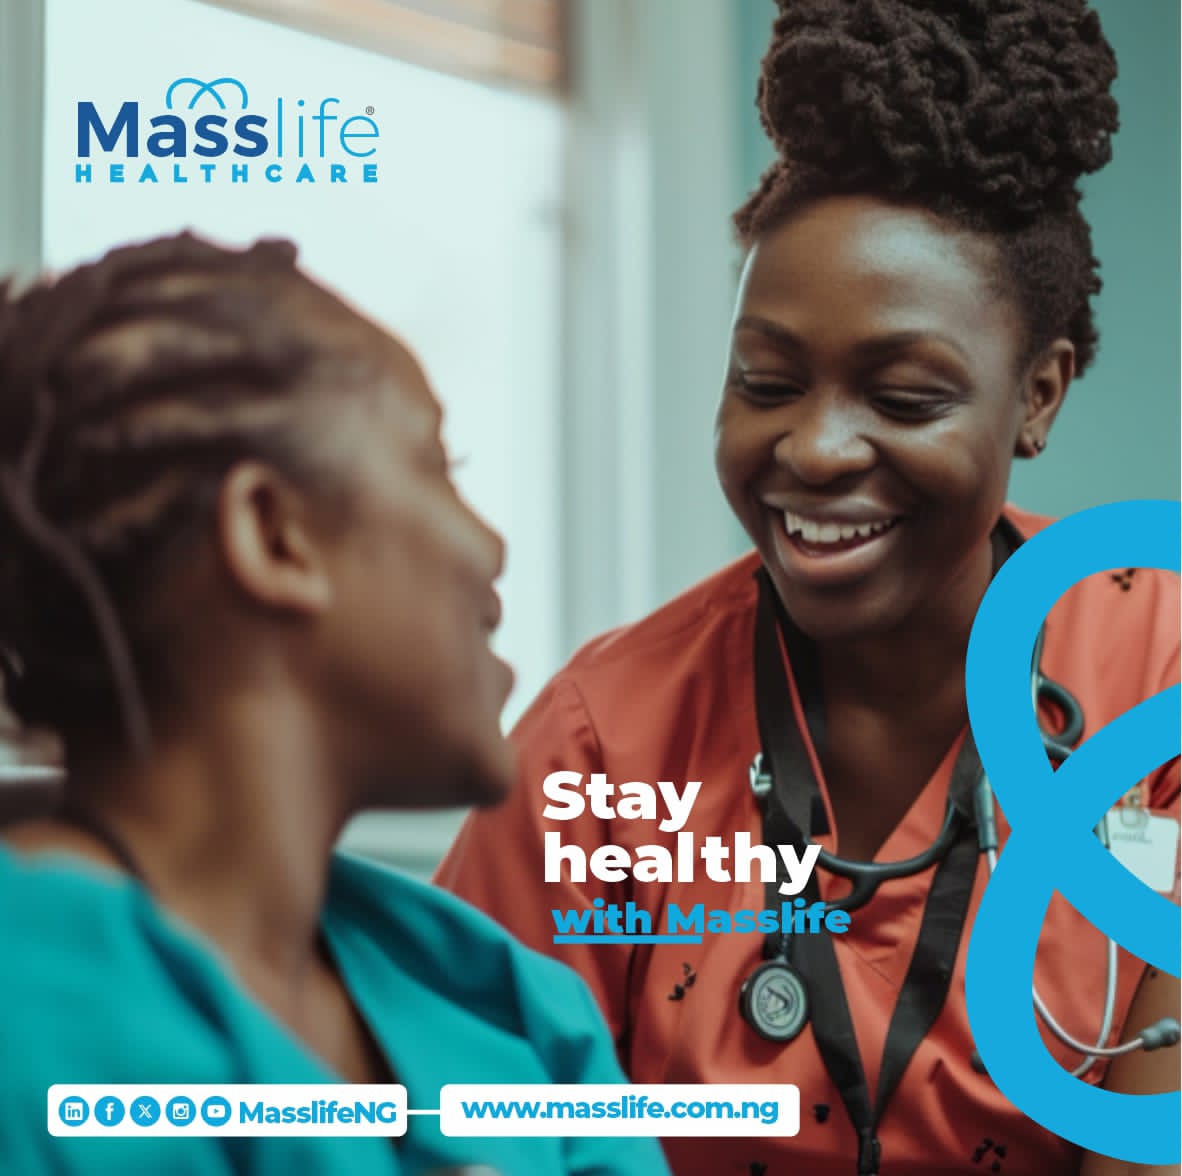 Don't let your health get lost in the shuffle. With Masslife, you'll be well taken care of. #Masslifecares #MasslifeHealthcafe #DiscoverMore #LiveBetter